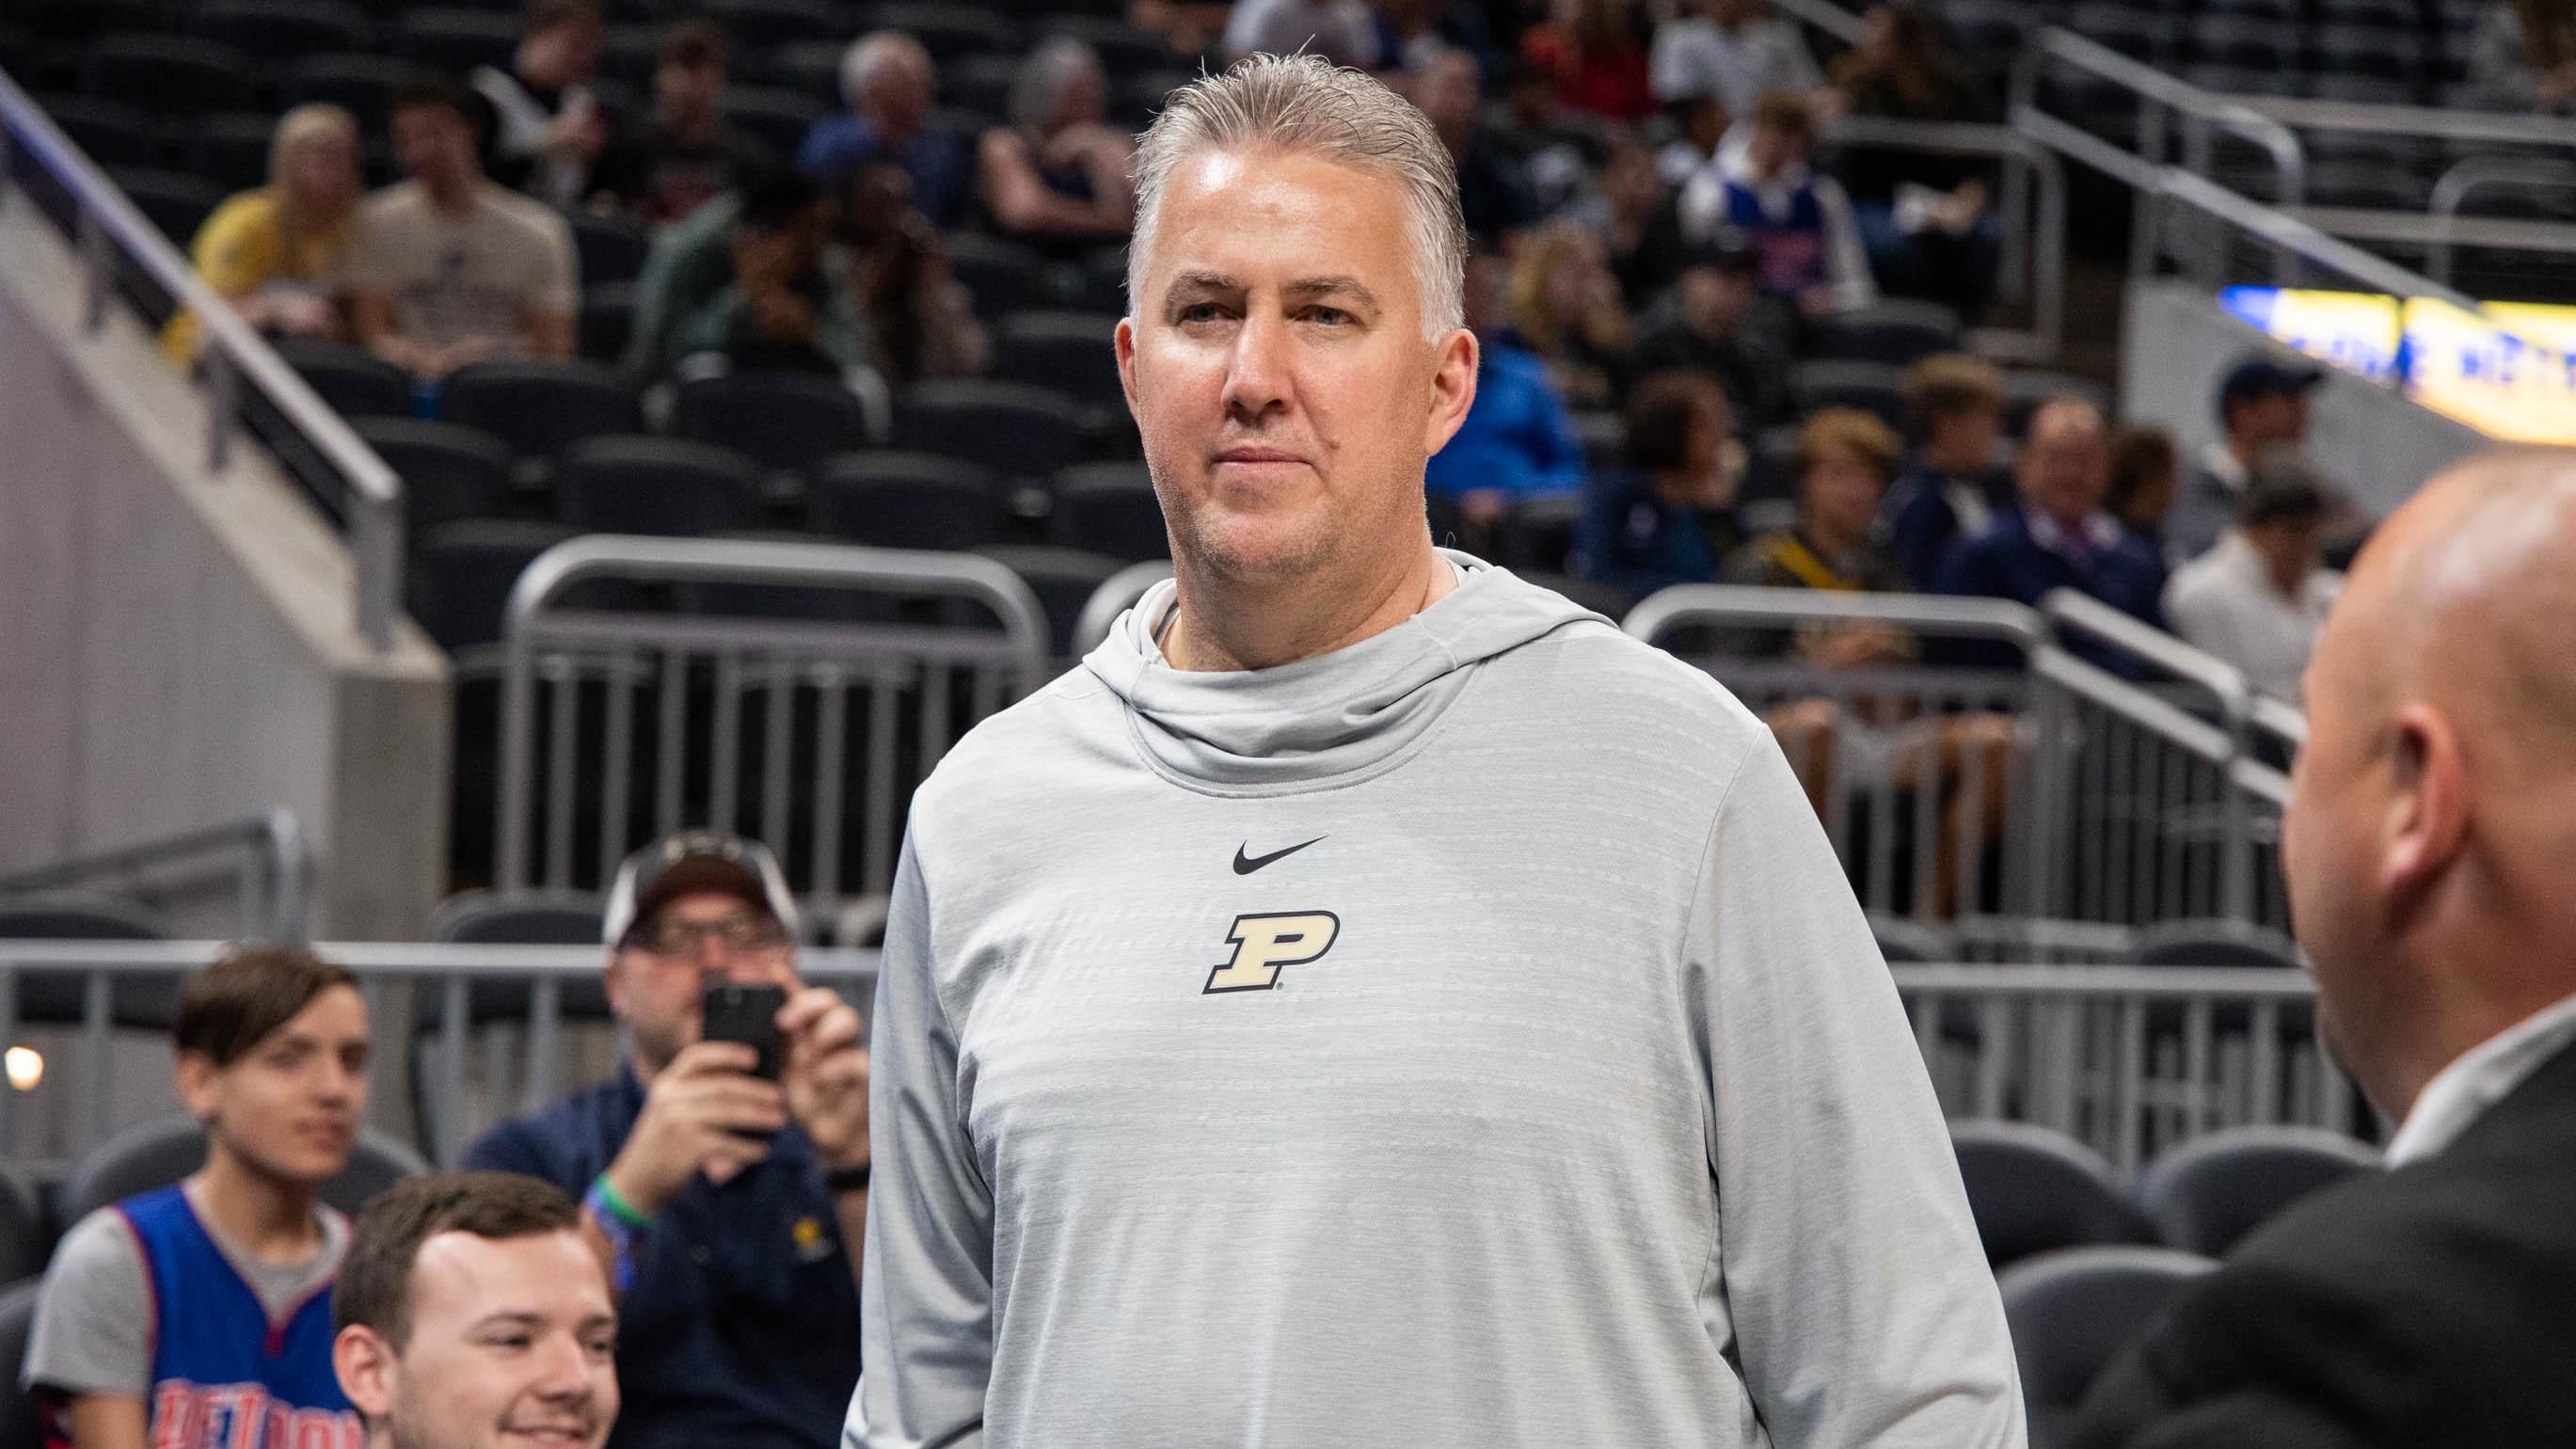 Rick Carlisle’s 1984 NCAA Tournament Run and Connection with Purdue’s Matt Painter: A Story of Admiration